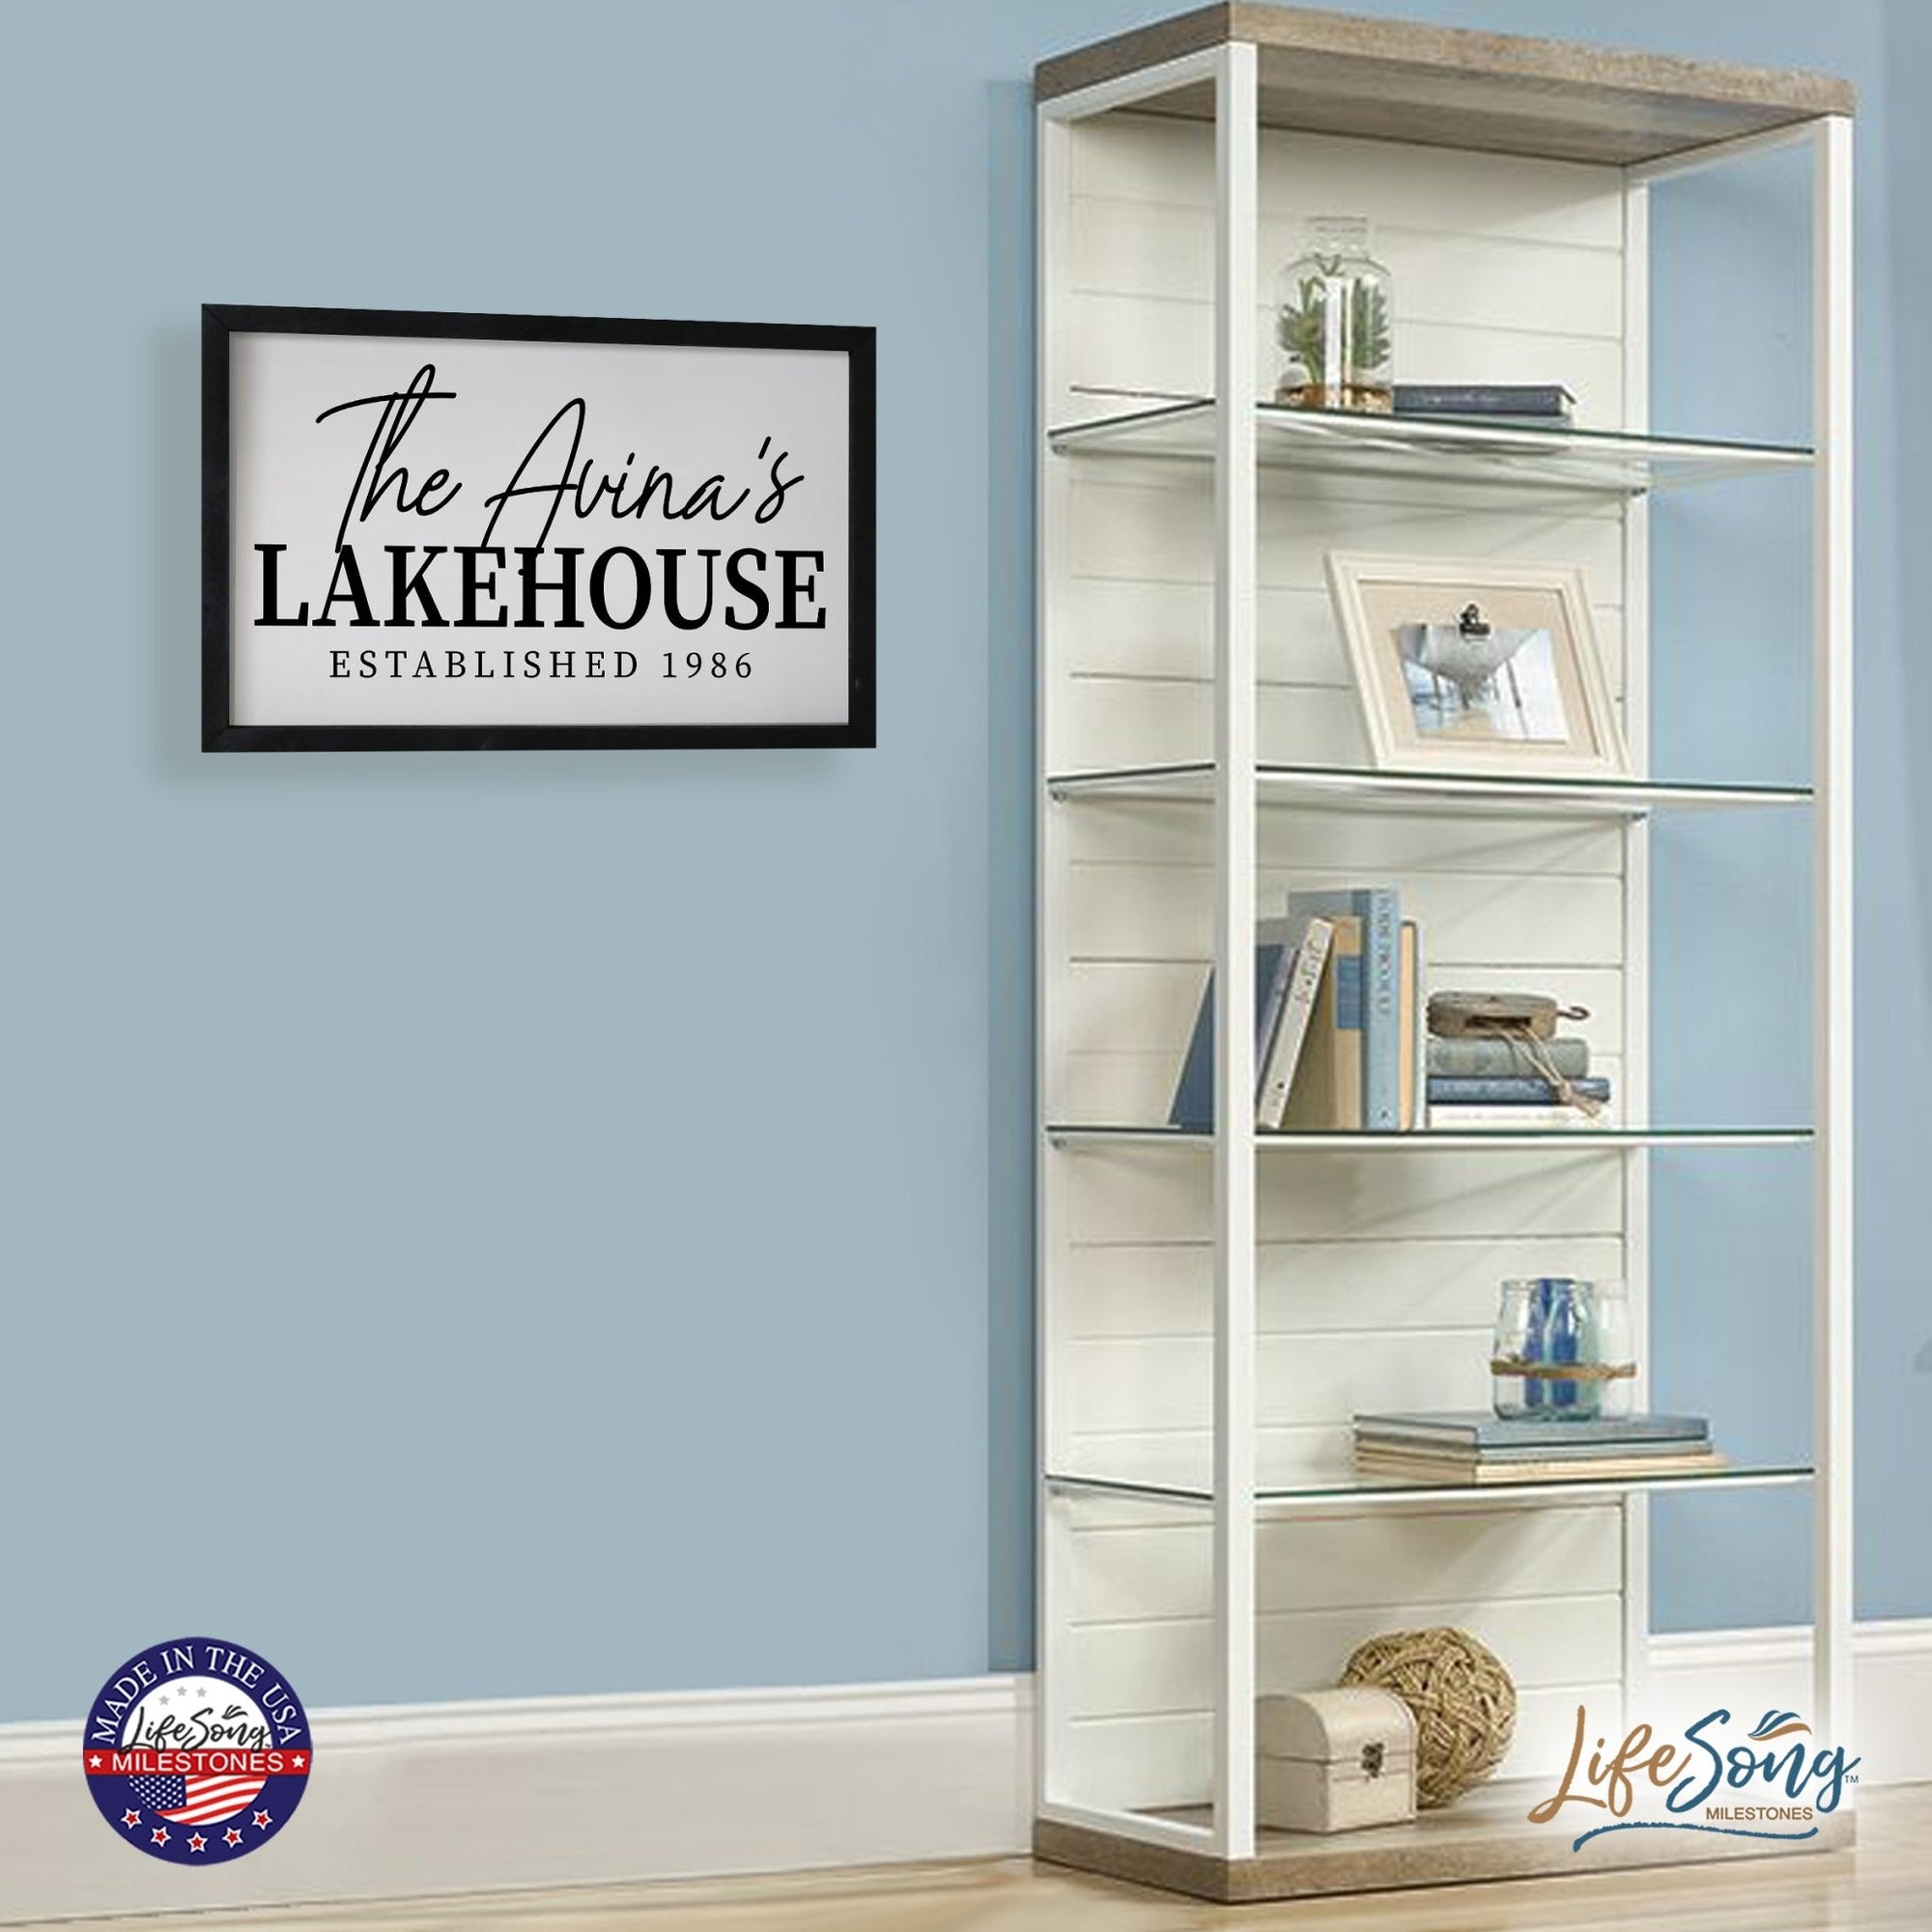 Inspirational Personalized Framed Shadow Box 12x18 - Lake House (Script) - LifeSong Milestones